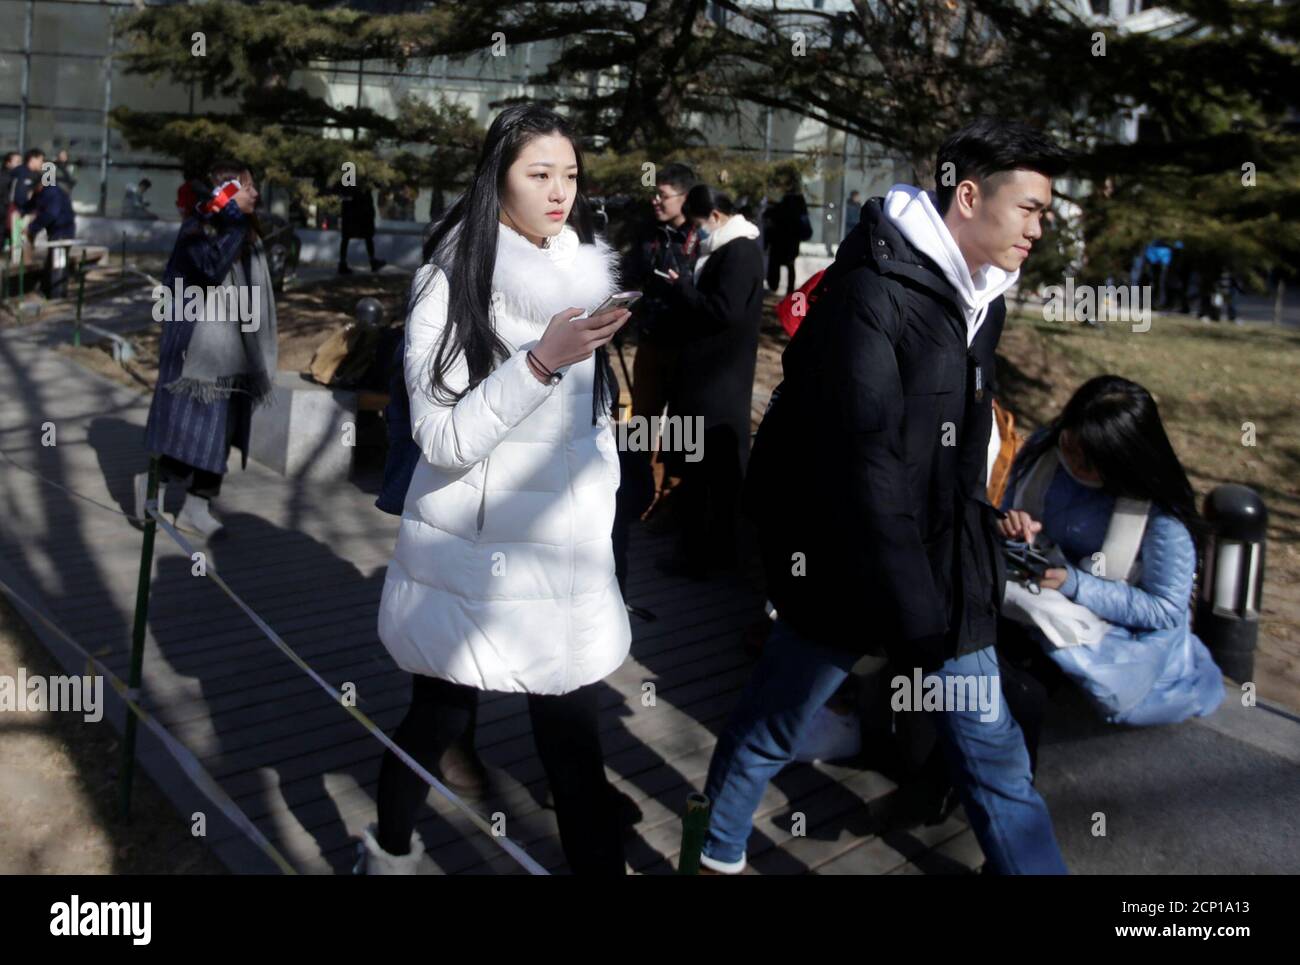 Students leave after their preliminary examination at Beijing Film Academy in Beijing, China February 8, 2017. REUTERS/Jason Lee Stock Photo